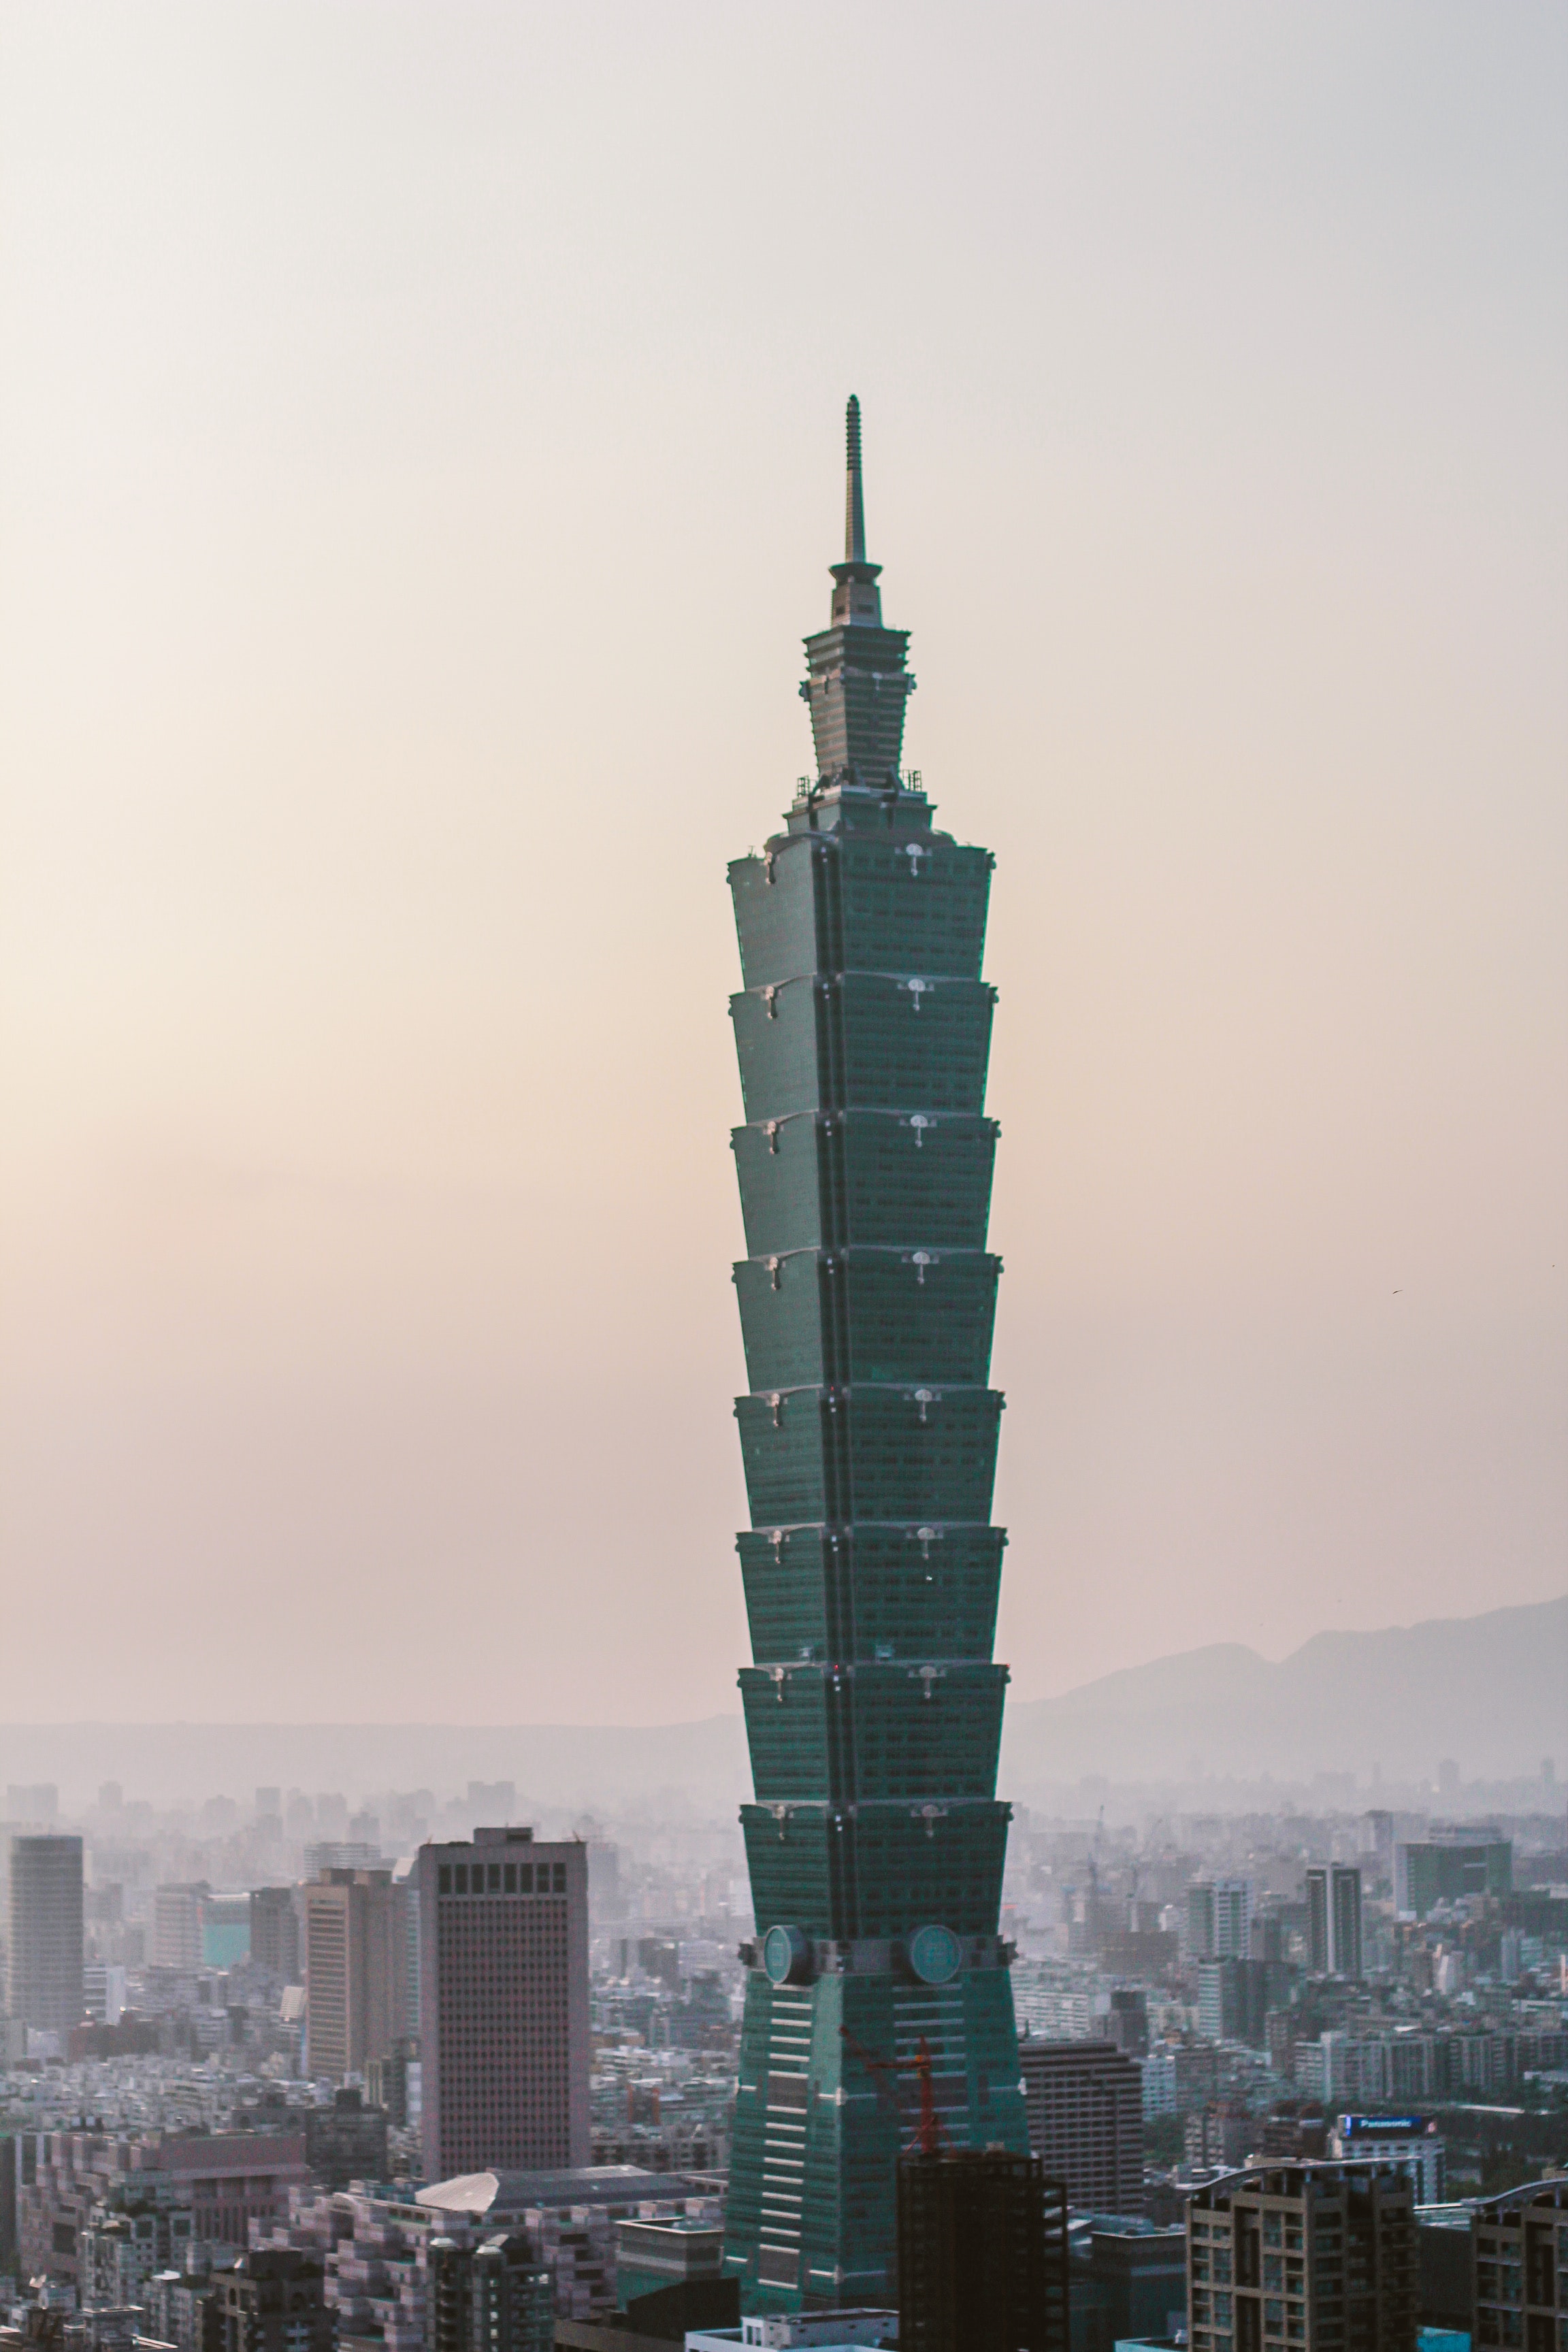 Taipei 101 Under Clear Sky at Daytime, Architecture, Tower, Taiwan, Sunset, HQ Photo